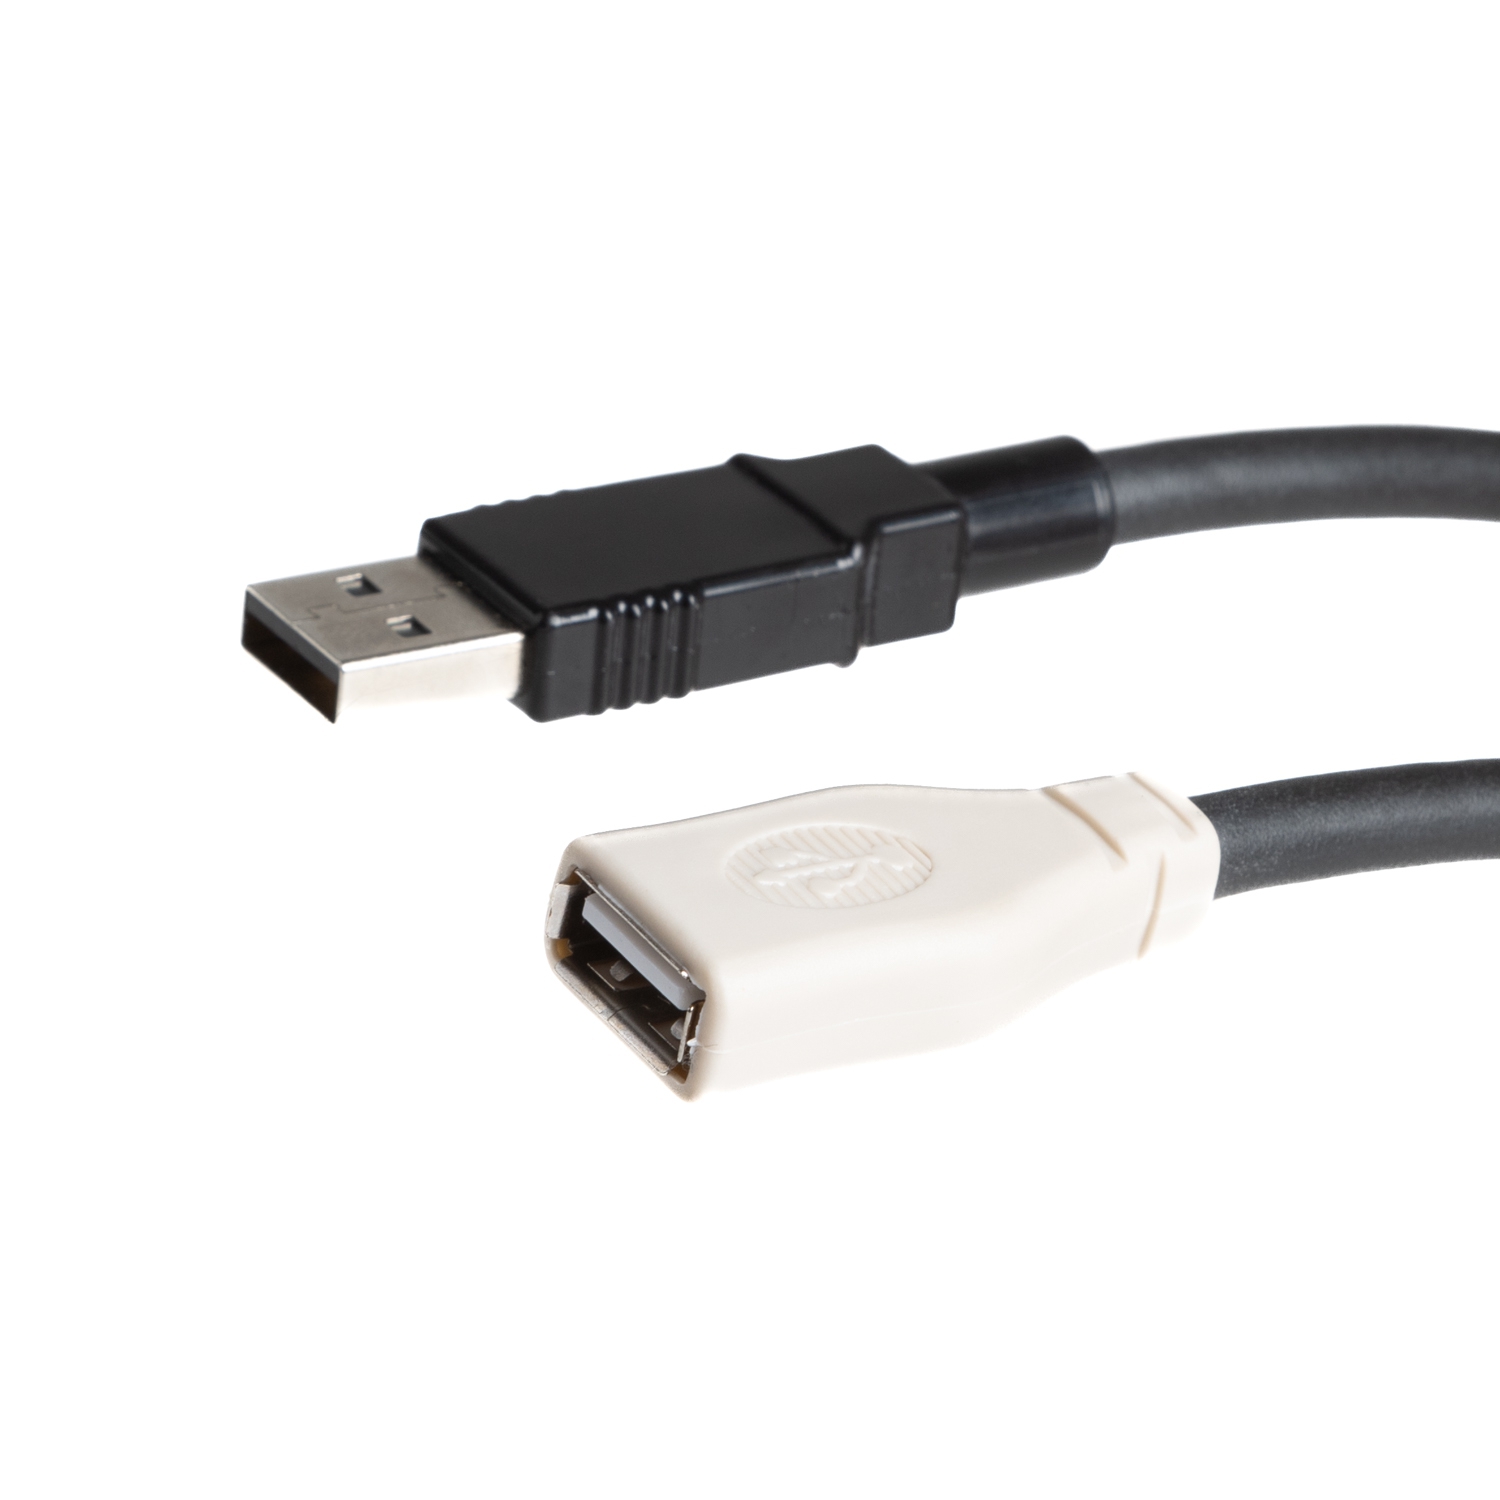 USB 2.0 extension cable PUR for industry + drag chains, Am to Af, 3m